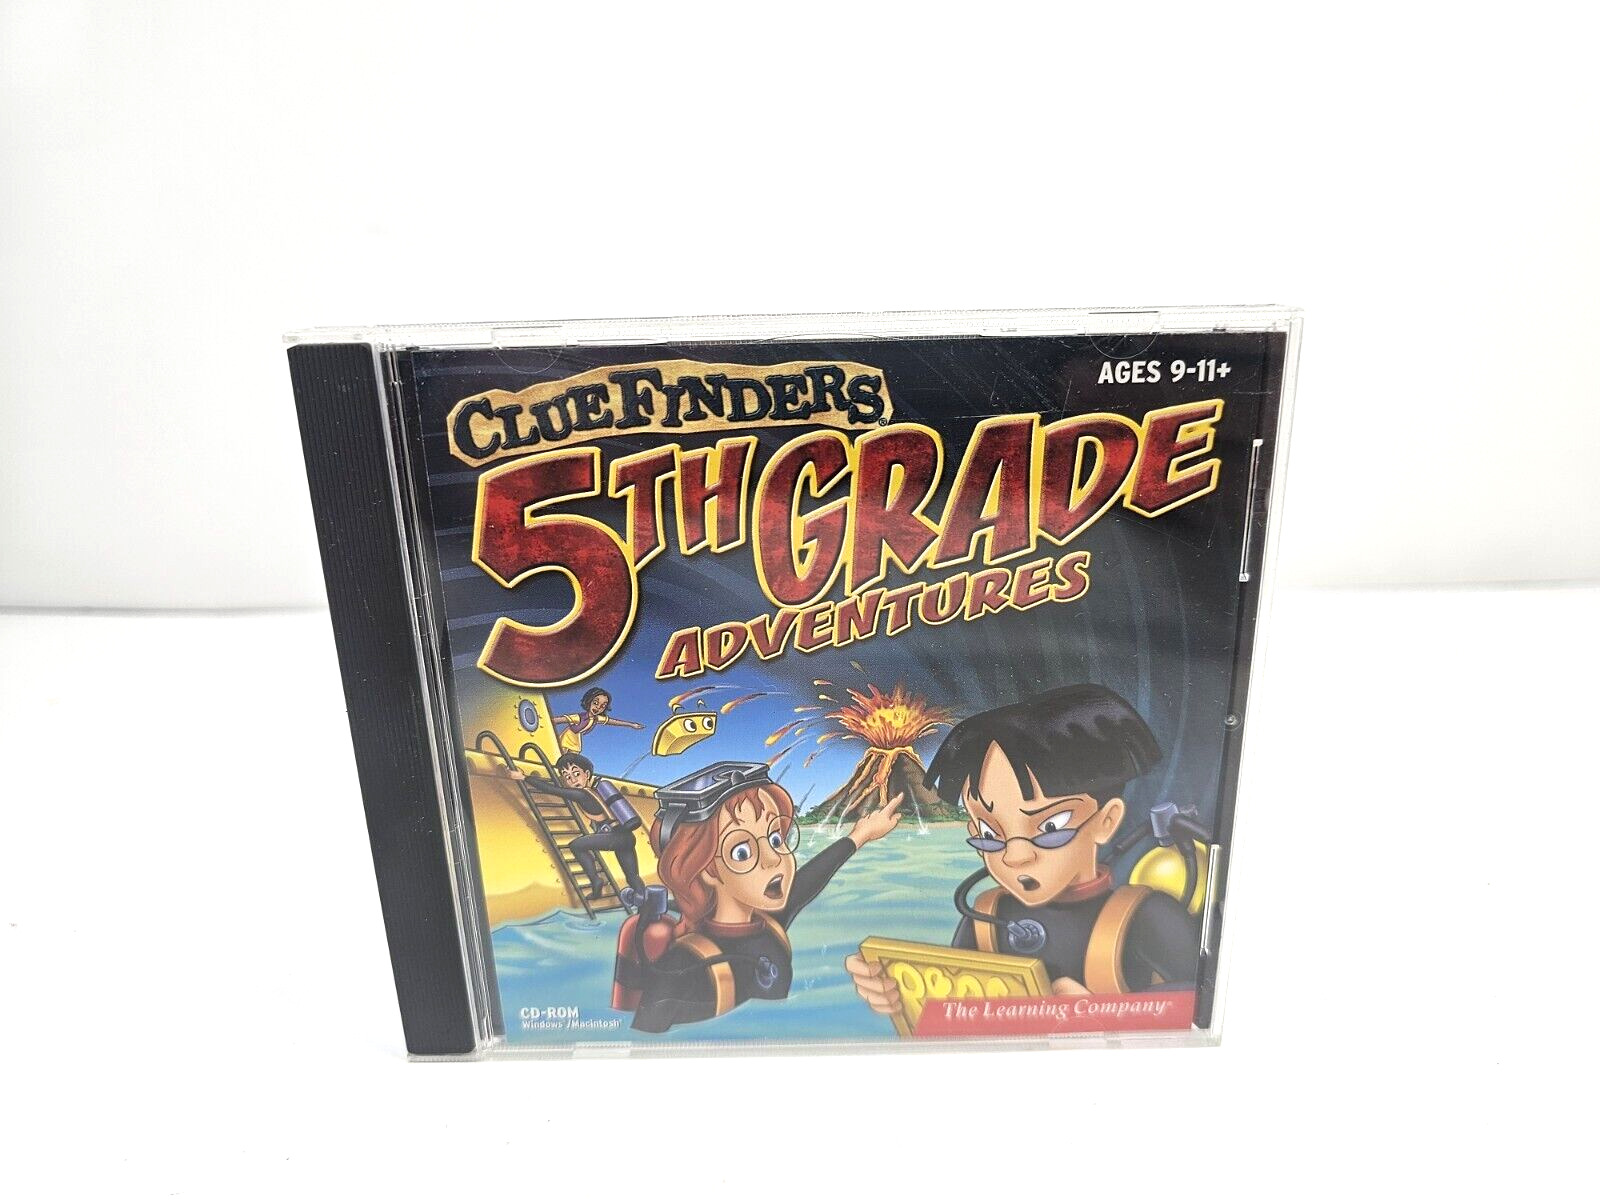 The Clue Finders 5th Grade Adventures Windows/Macintosh PC CD-ROM Ages 9-11+